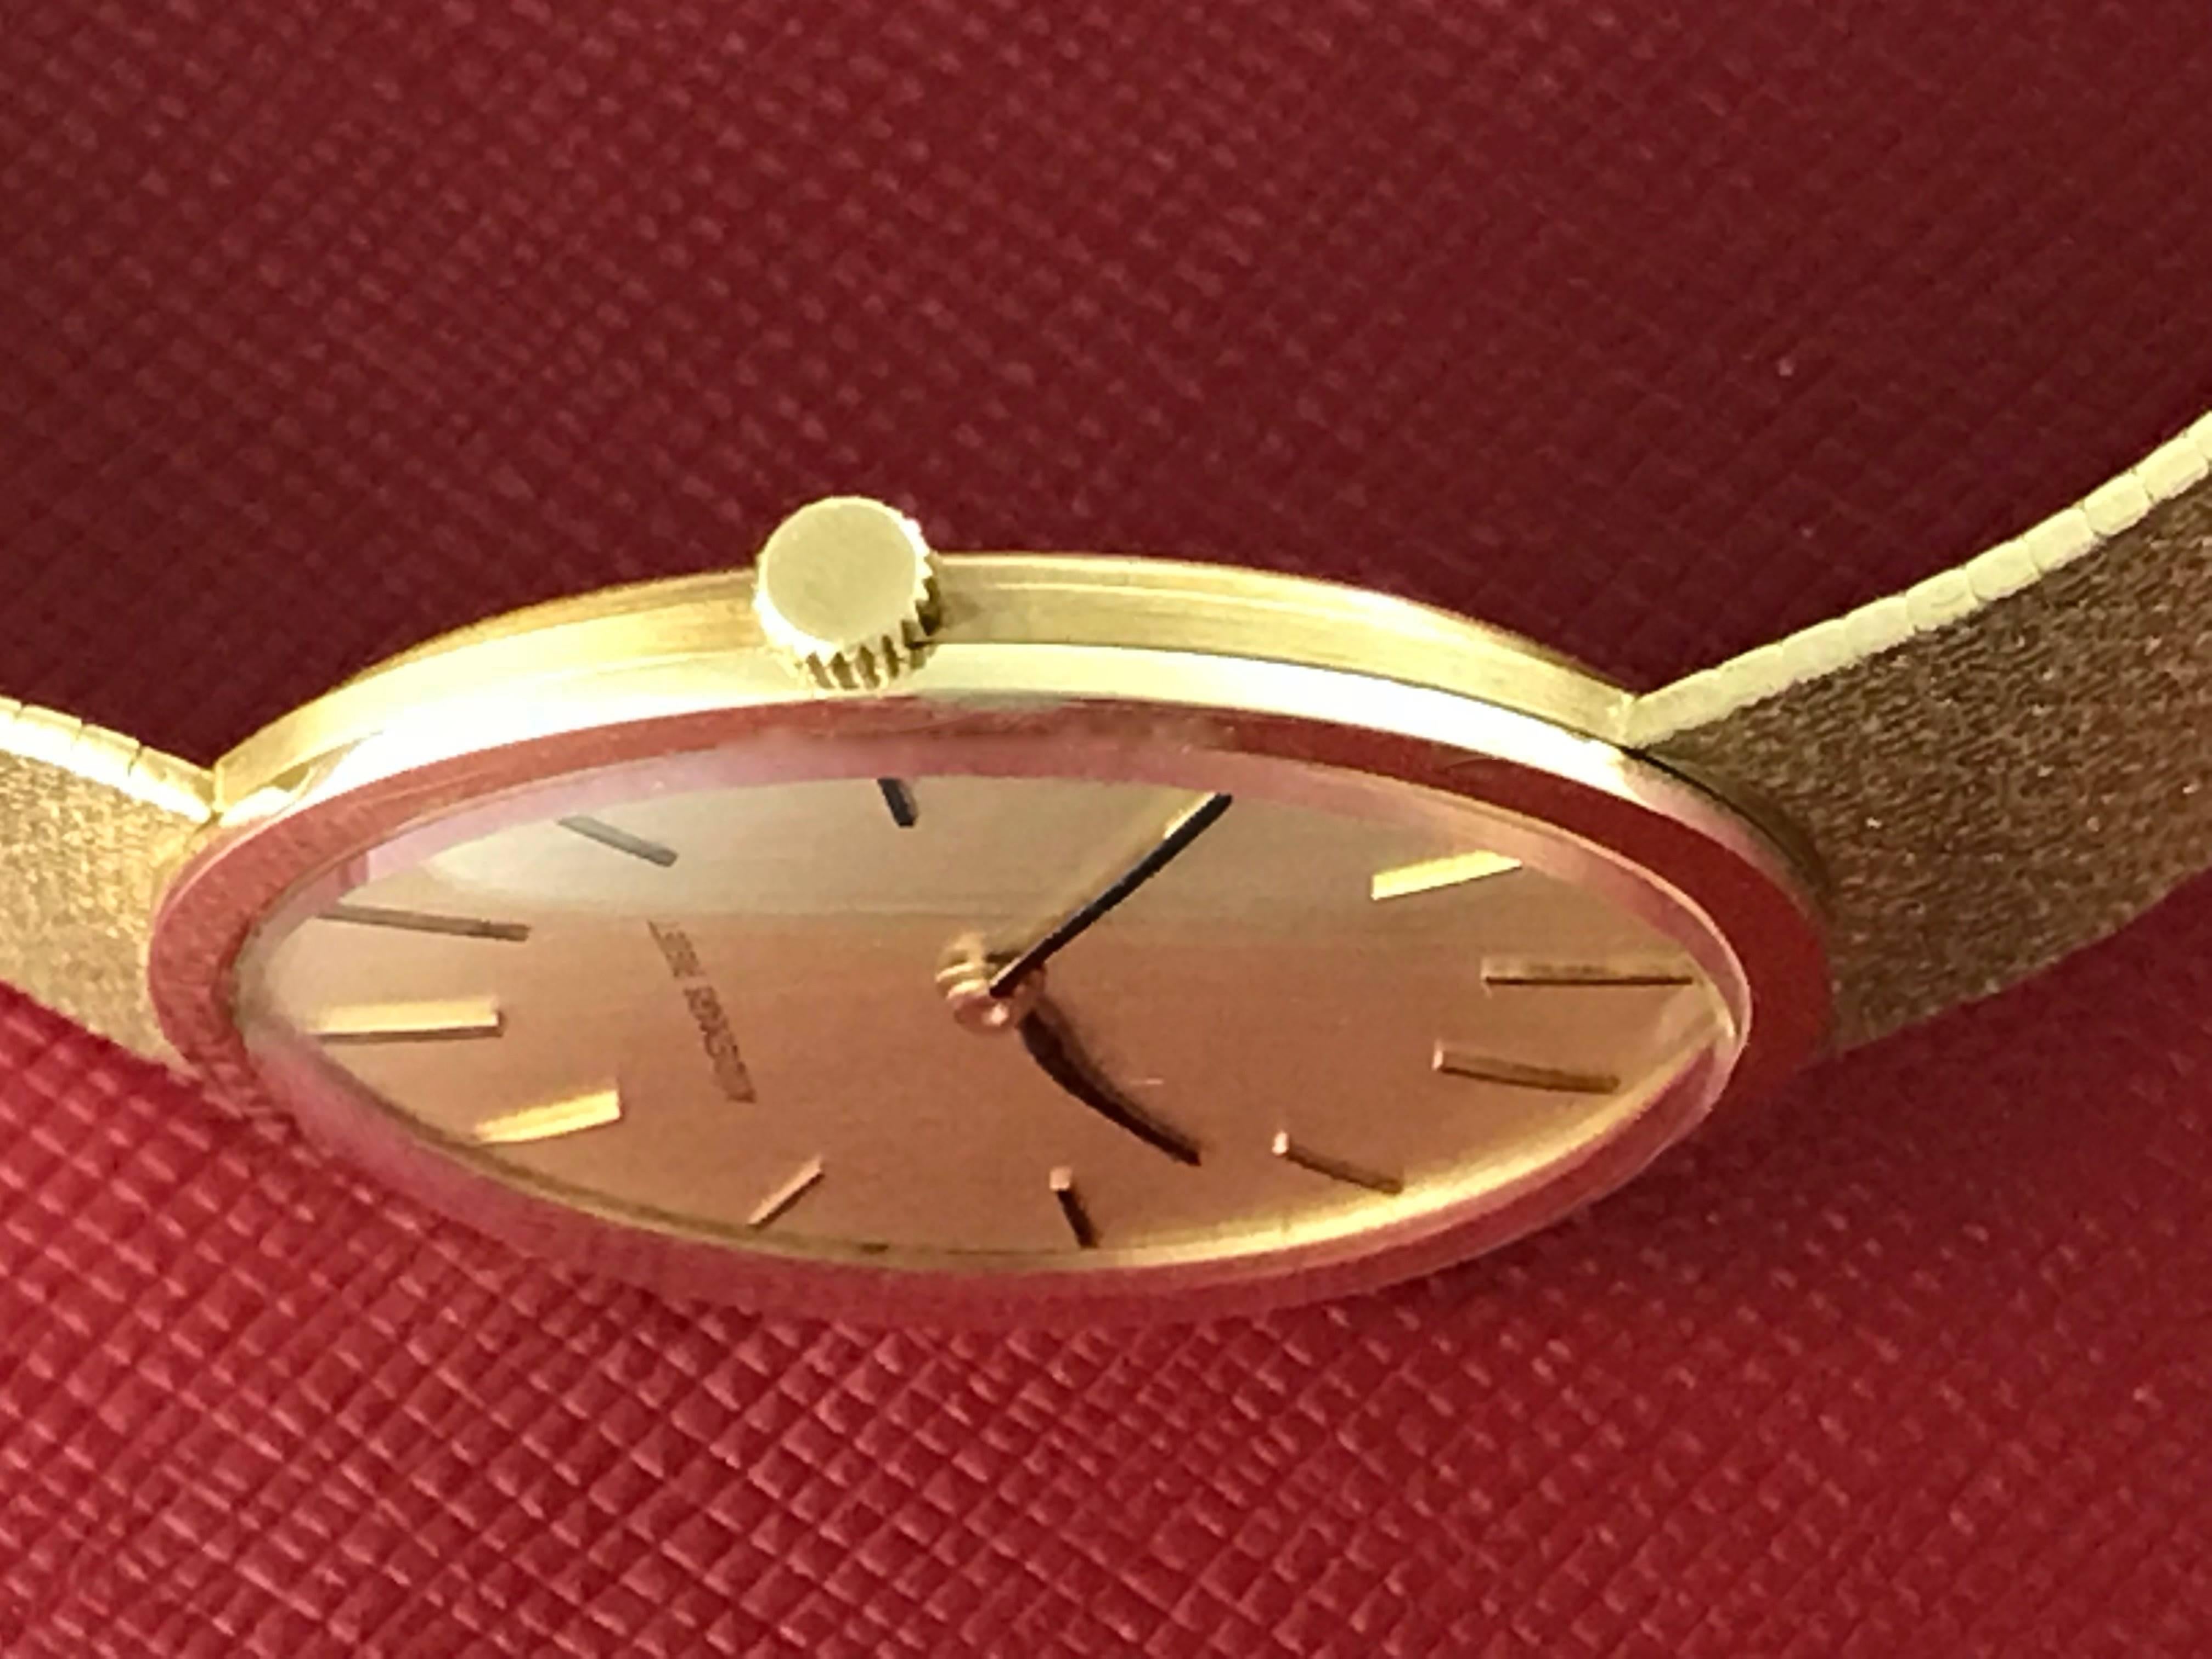 Audemars Piguet 18k Yellow Gold Midsize Manual Wind Wrist Watch In Excellent Condition For Sale In Dallas, TX